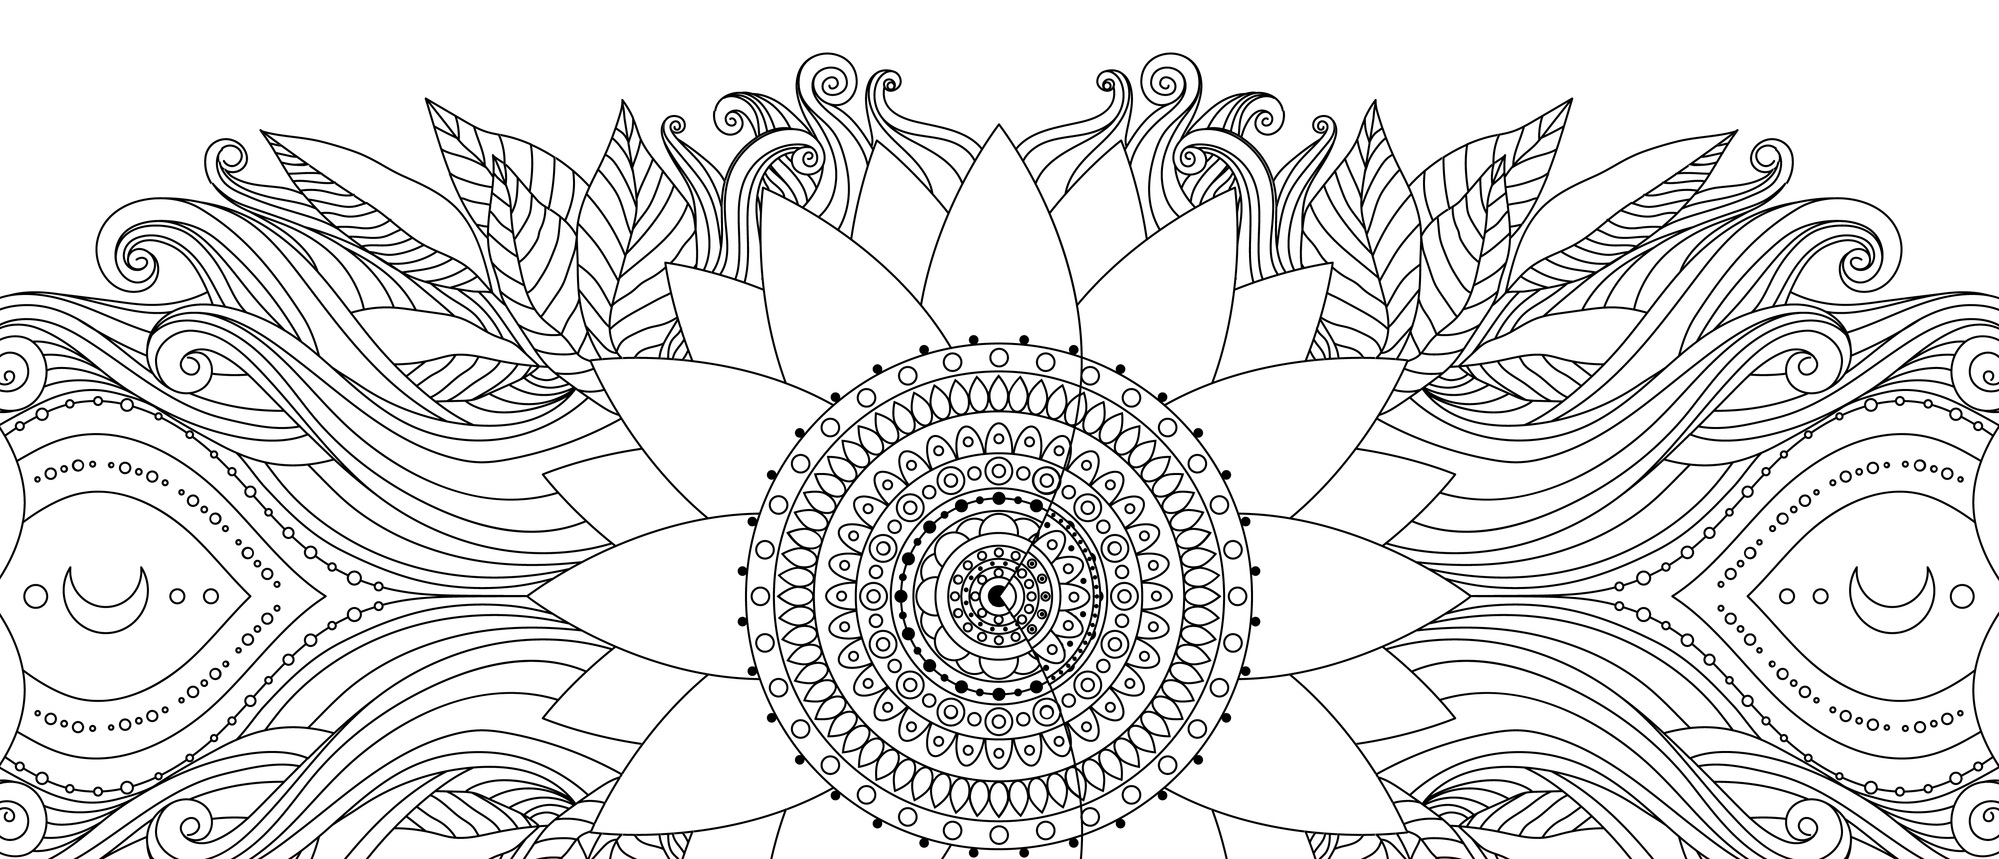 Hand drawn wavy and flower ornament. Ethnic asian boho design card, black and white illustration for coloring book, invitation, poster. Vector background.